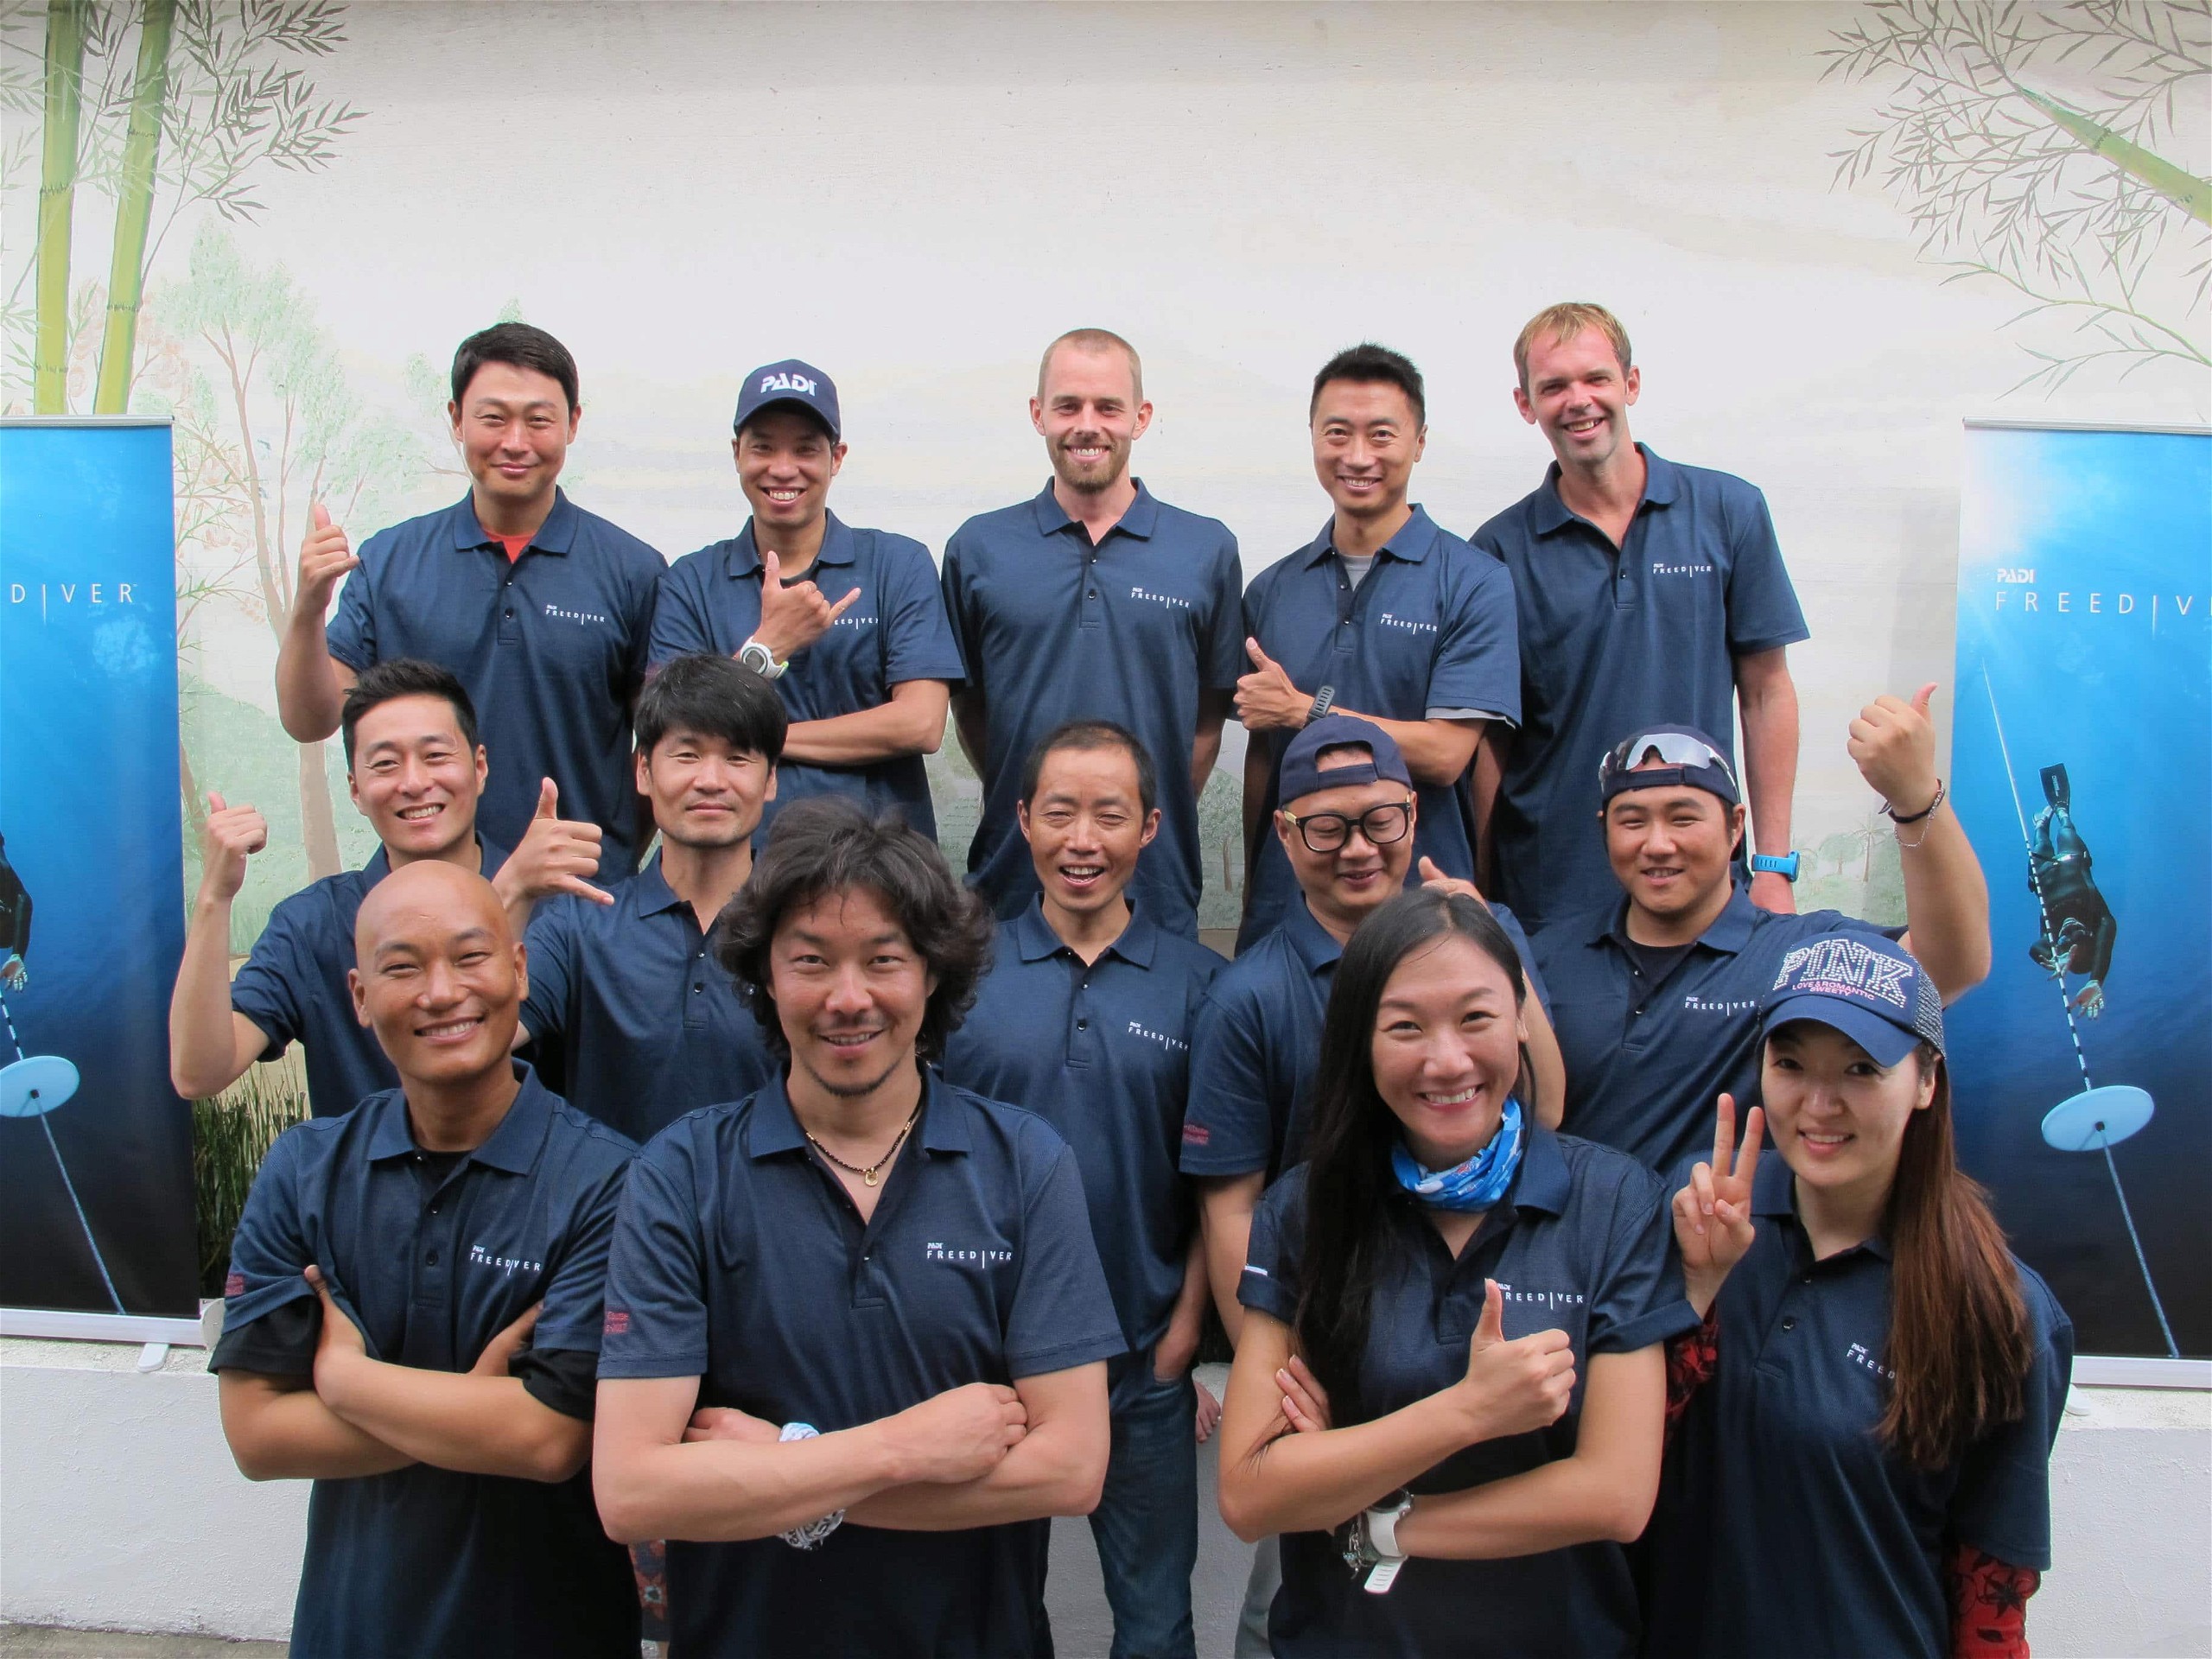 PADI Holds First-Ever Freediver Instructor Trainer Course In Asia